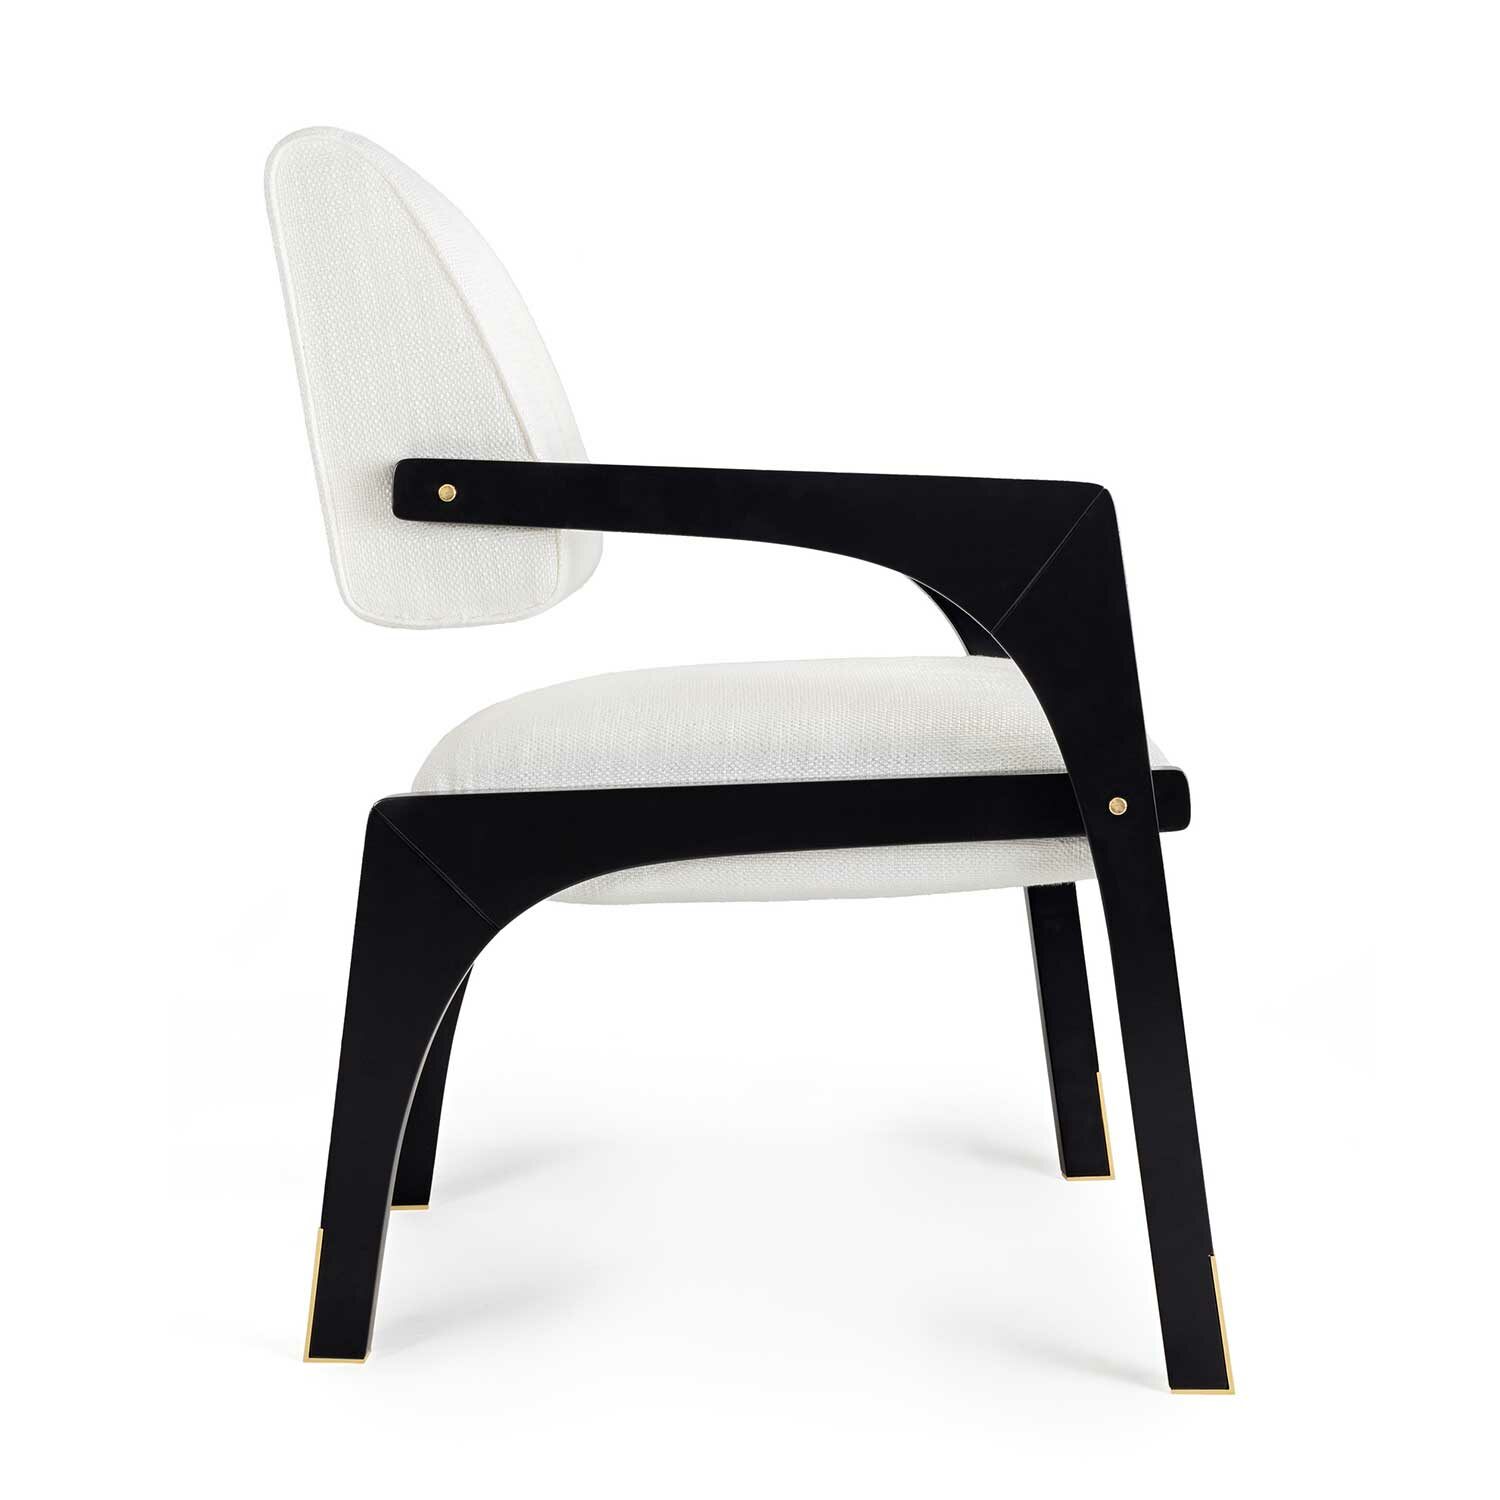 ARCHES dining chair